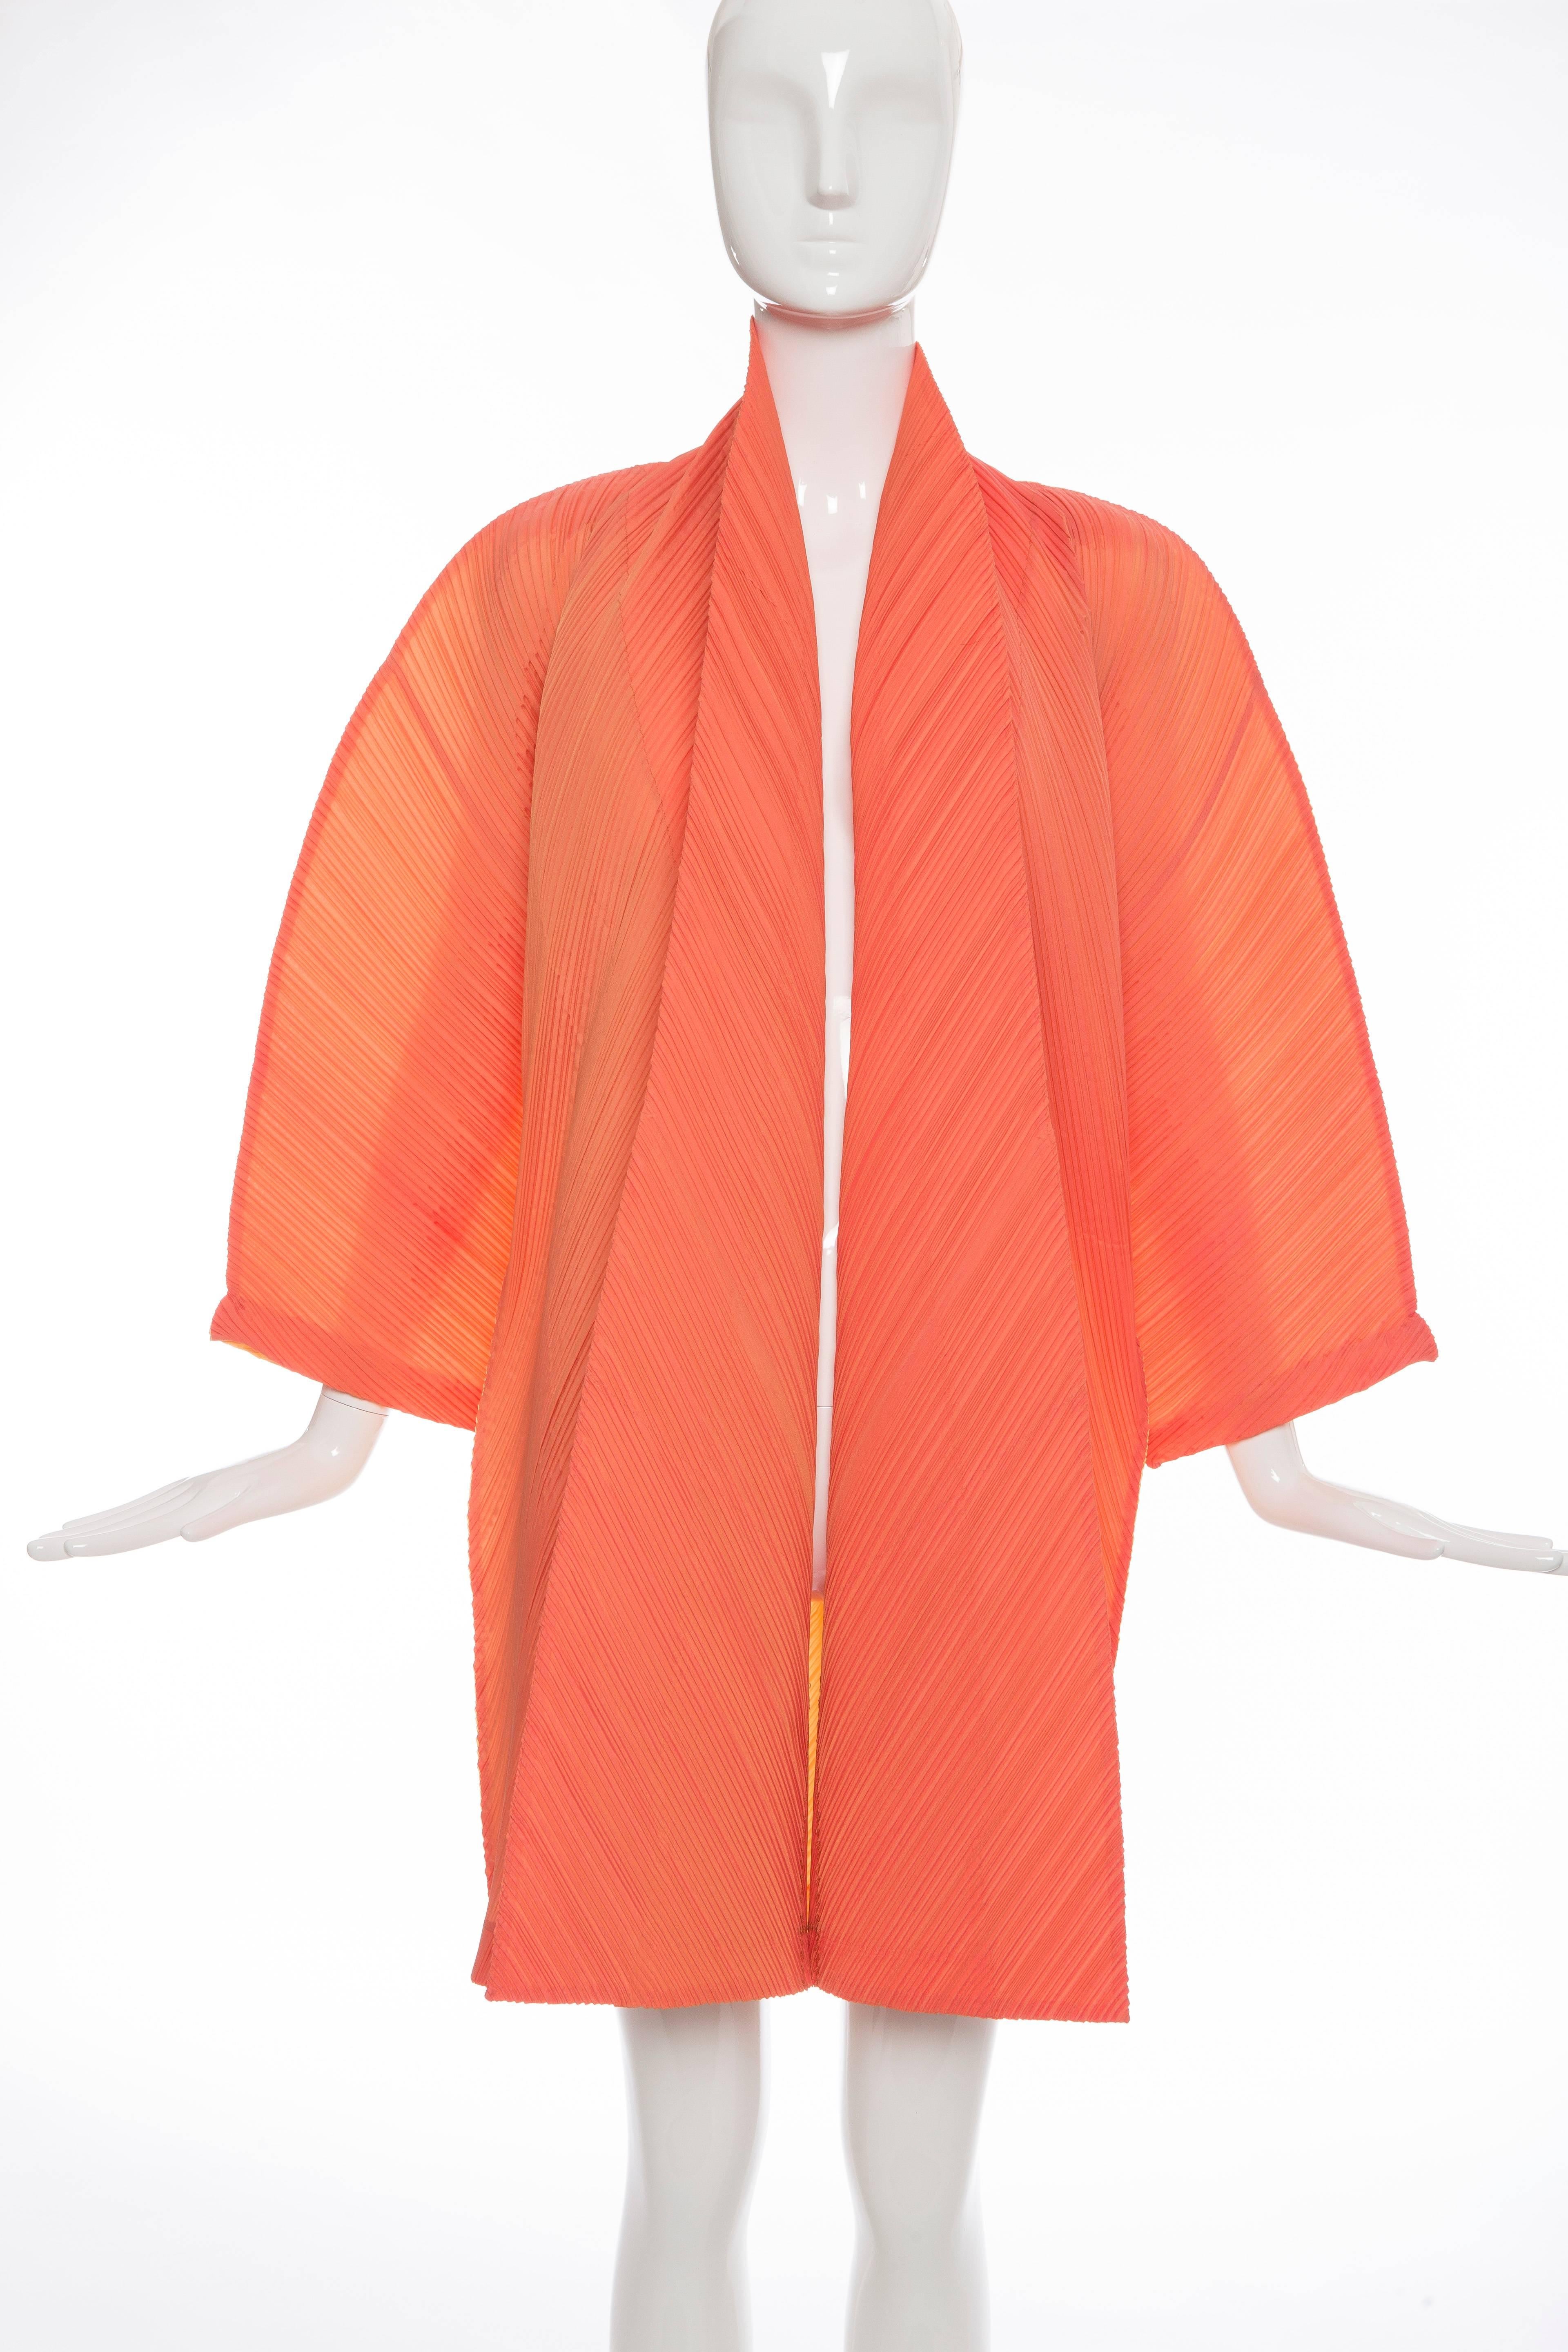 Issey Miyake, Spring-Summer 1995, coral front with yellow back pleated polyester cocoon jacket with black on white woven label.

Bust: 58, Waist: 58, Length: 36